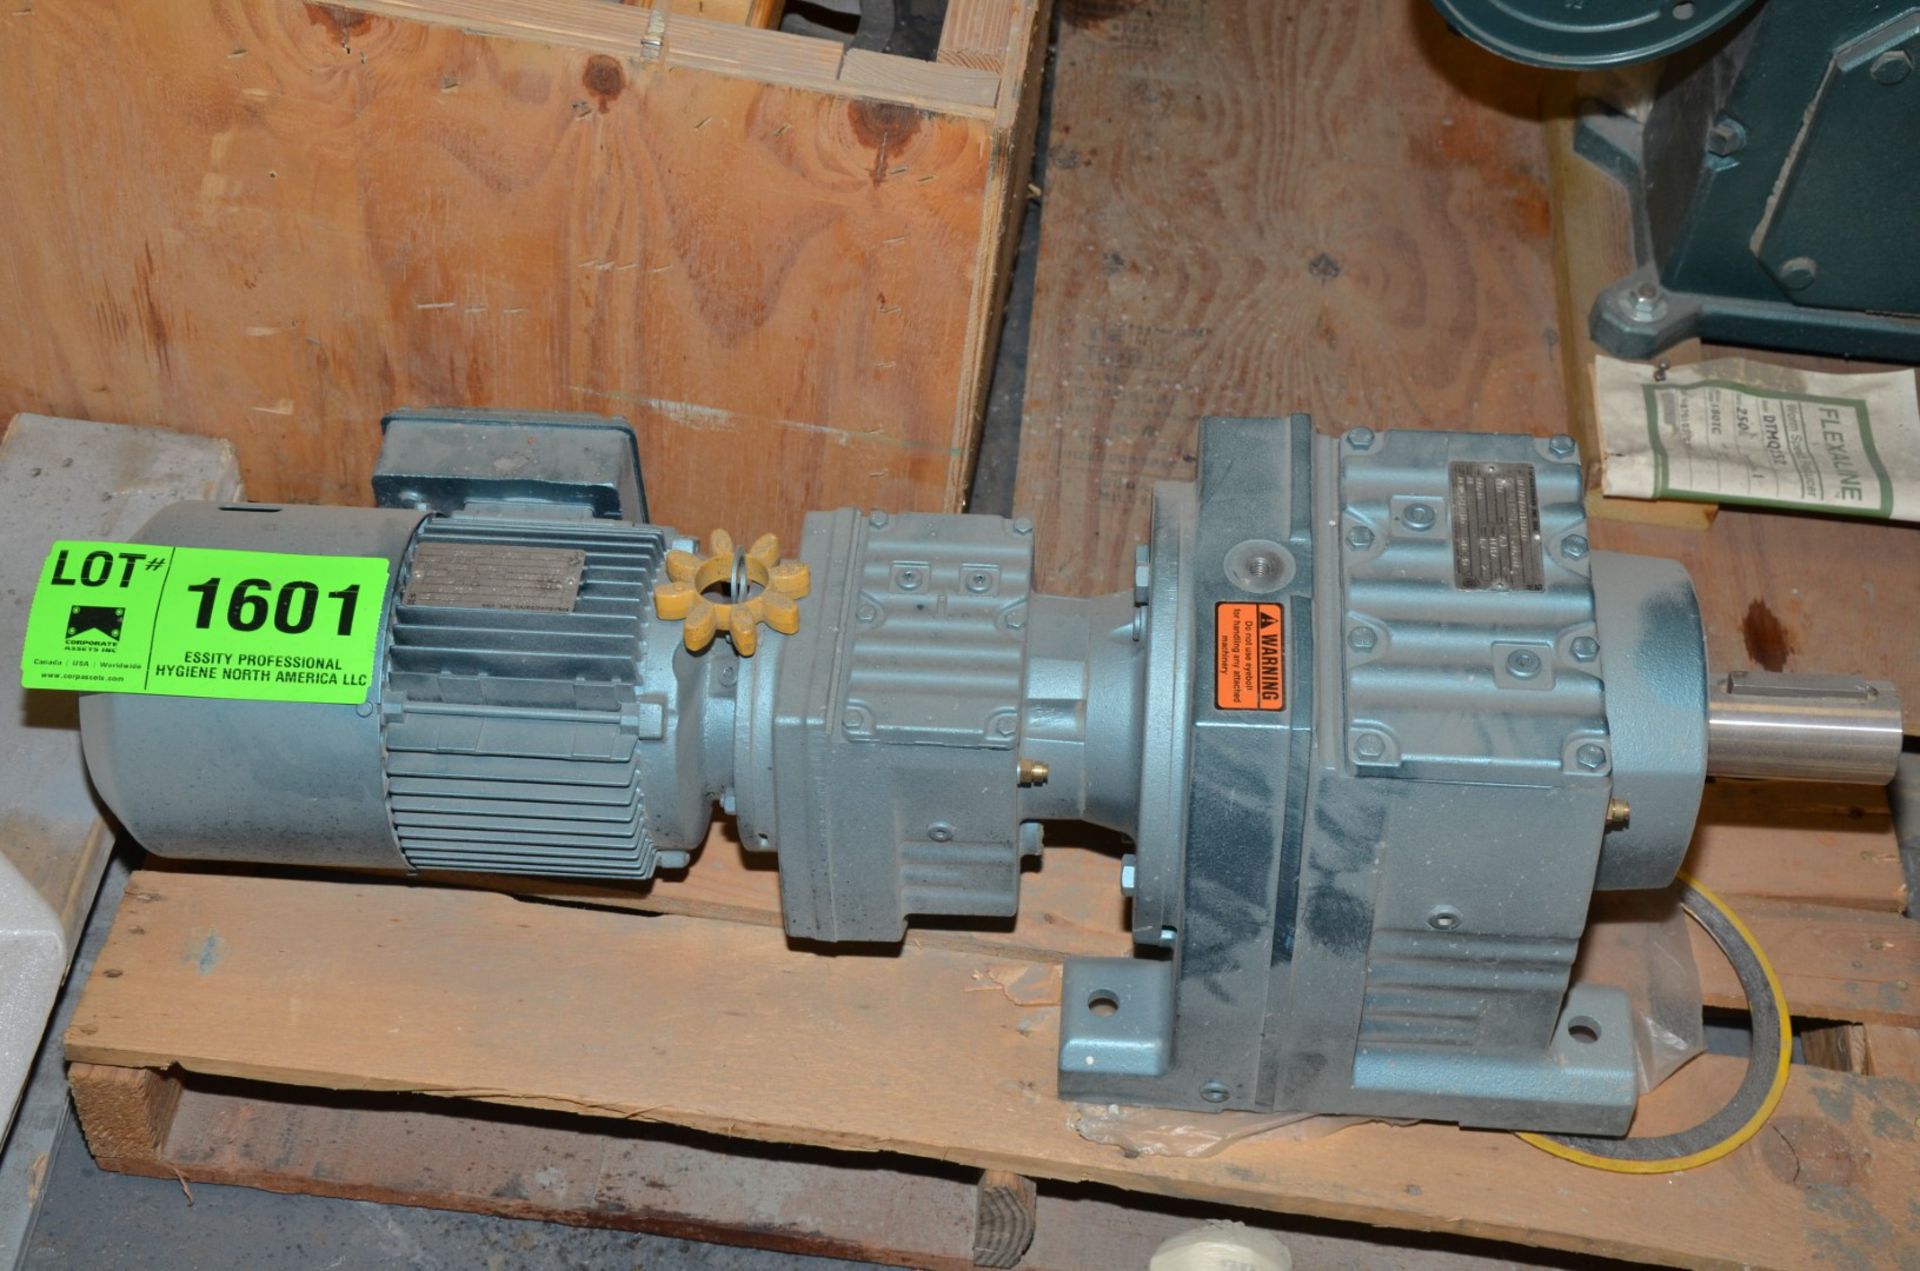 SEW EURODRIVE GEARMOTOR [RIGGING FEE FOR LOT #1601 - $25 USD PLUS APPLICABLE TAXES]